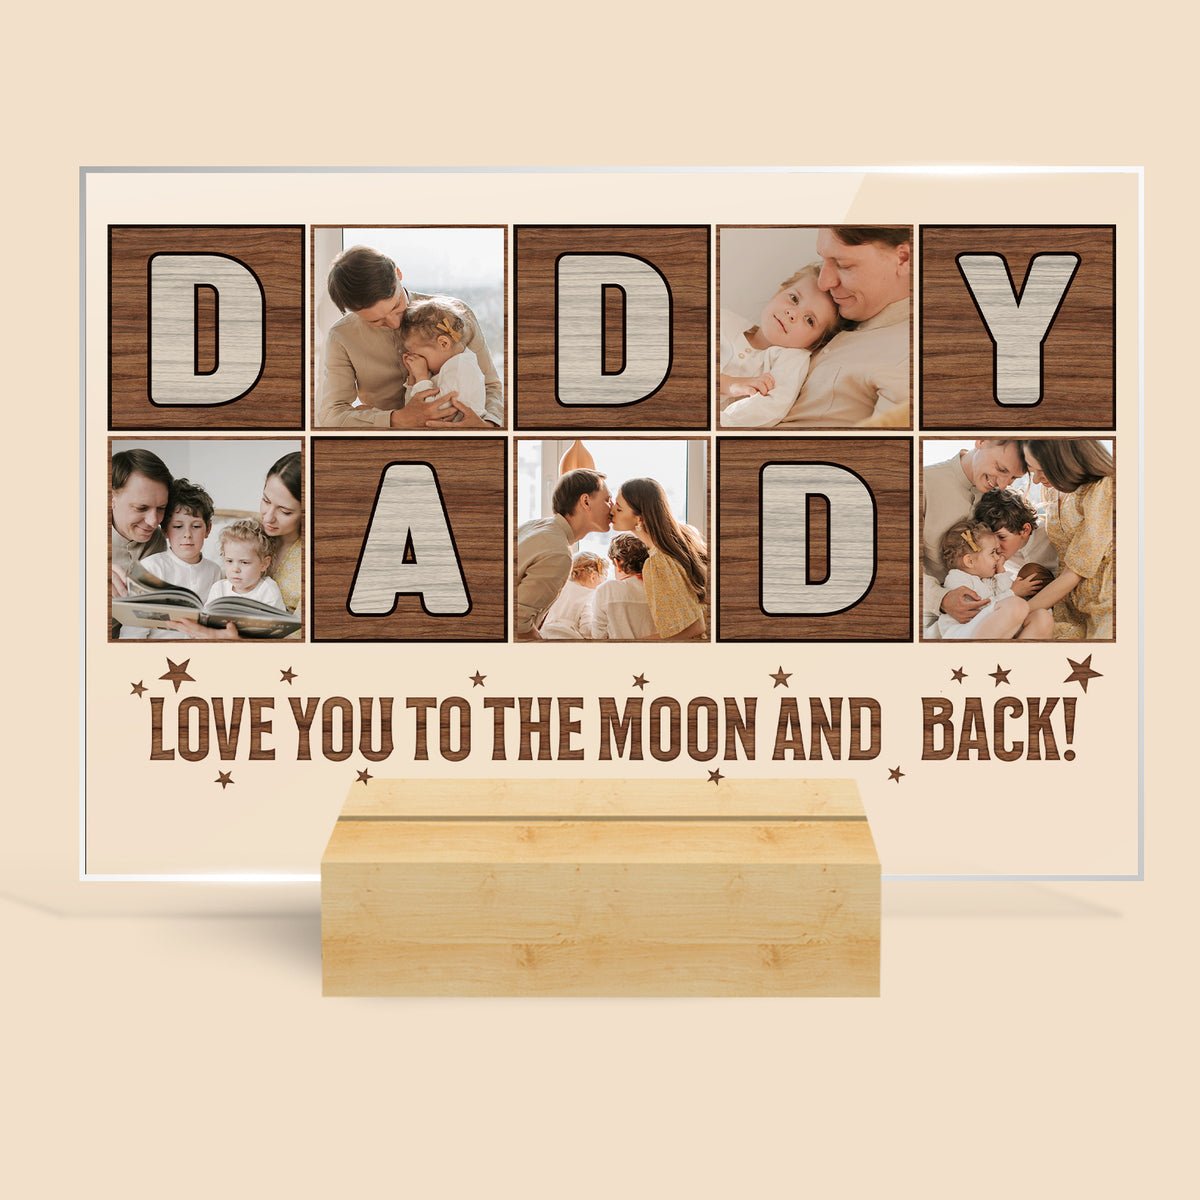 Daddy - Love You To The Moon And Back - Personalized Acrylic Plaque - Best Gift For Dad/ Grandpa - Giftago